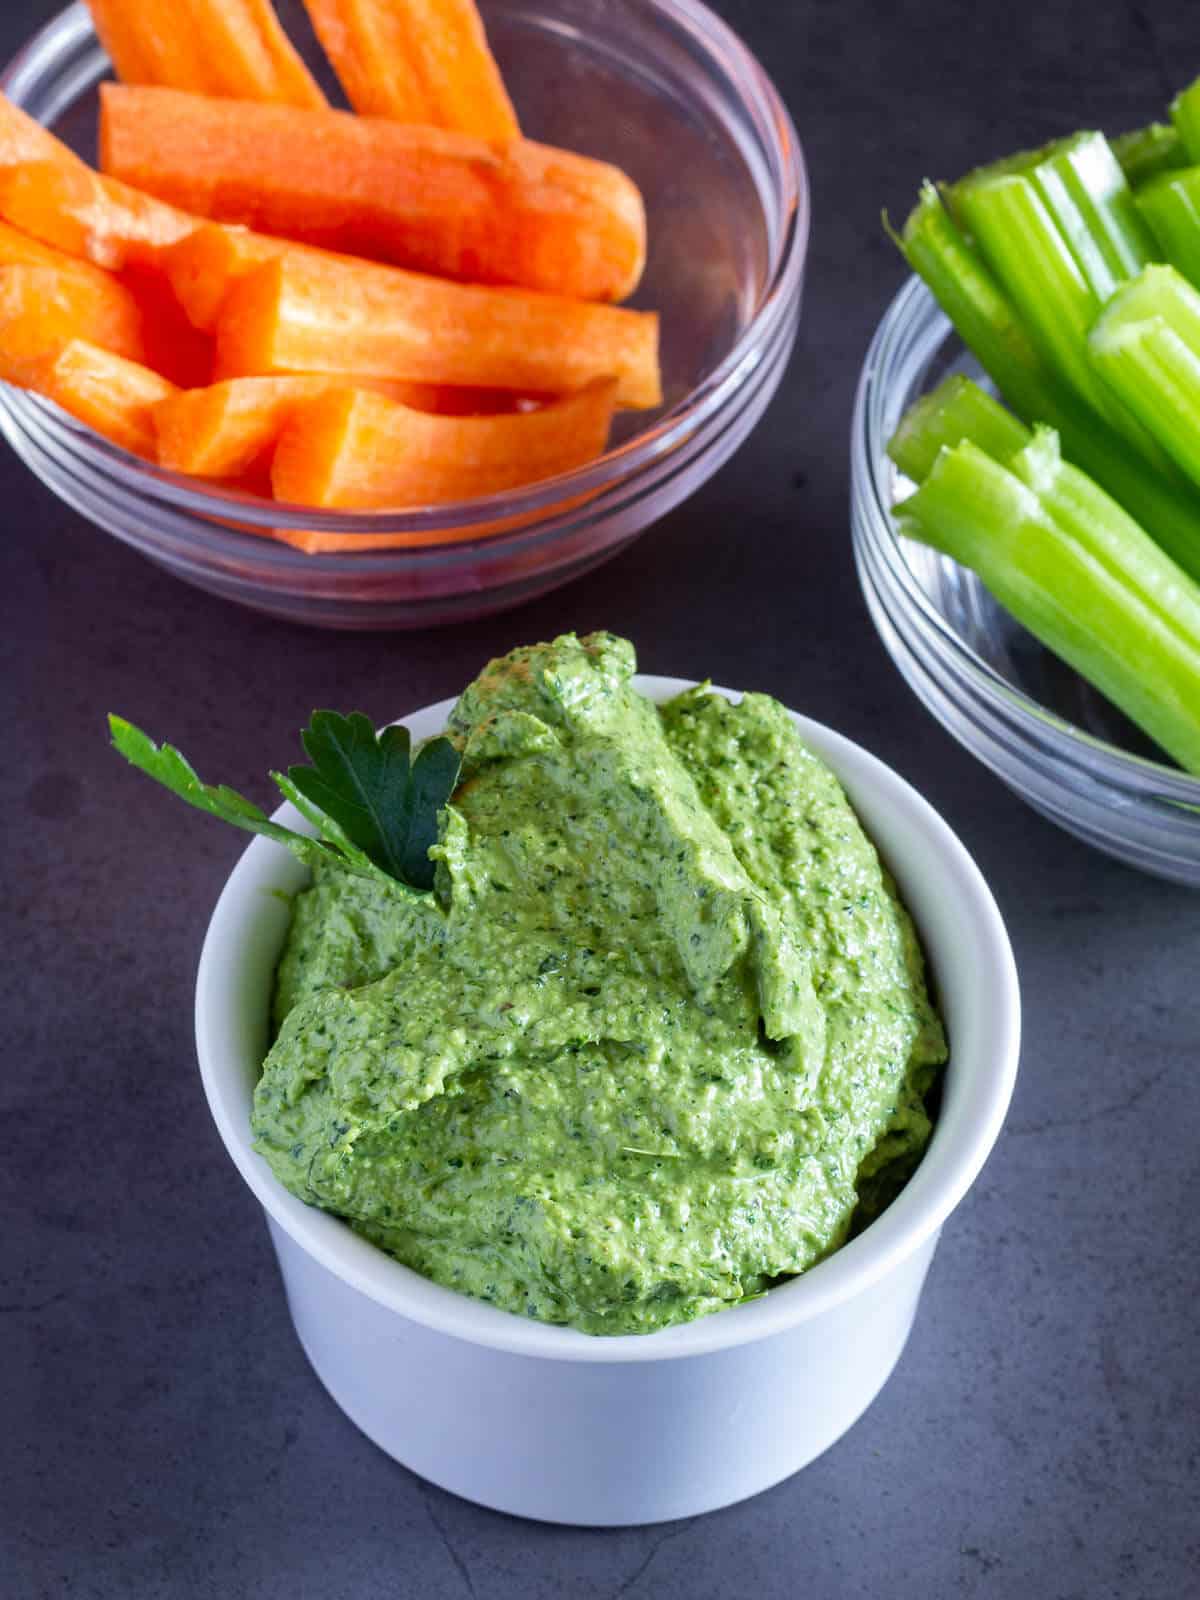 Green Goddess Dip with Carrots and Celery Sticks